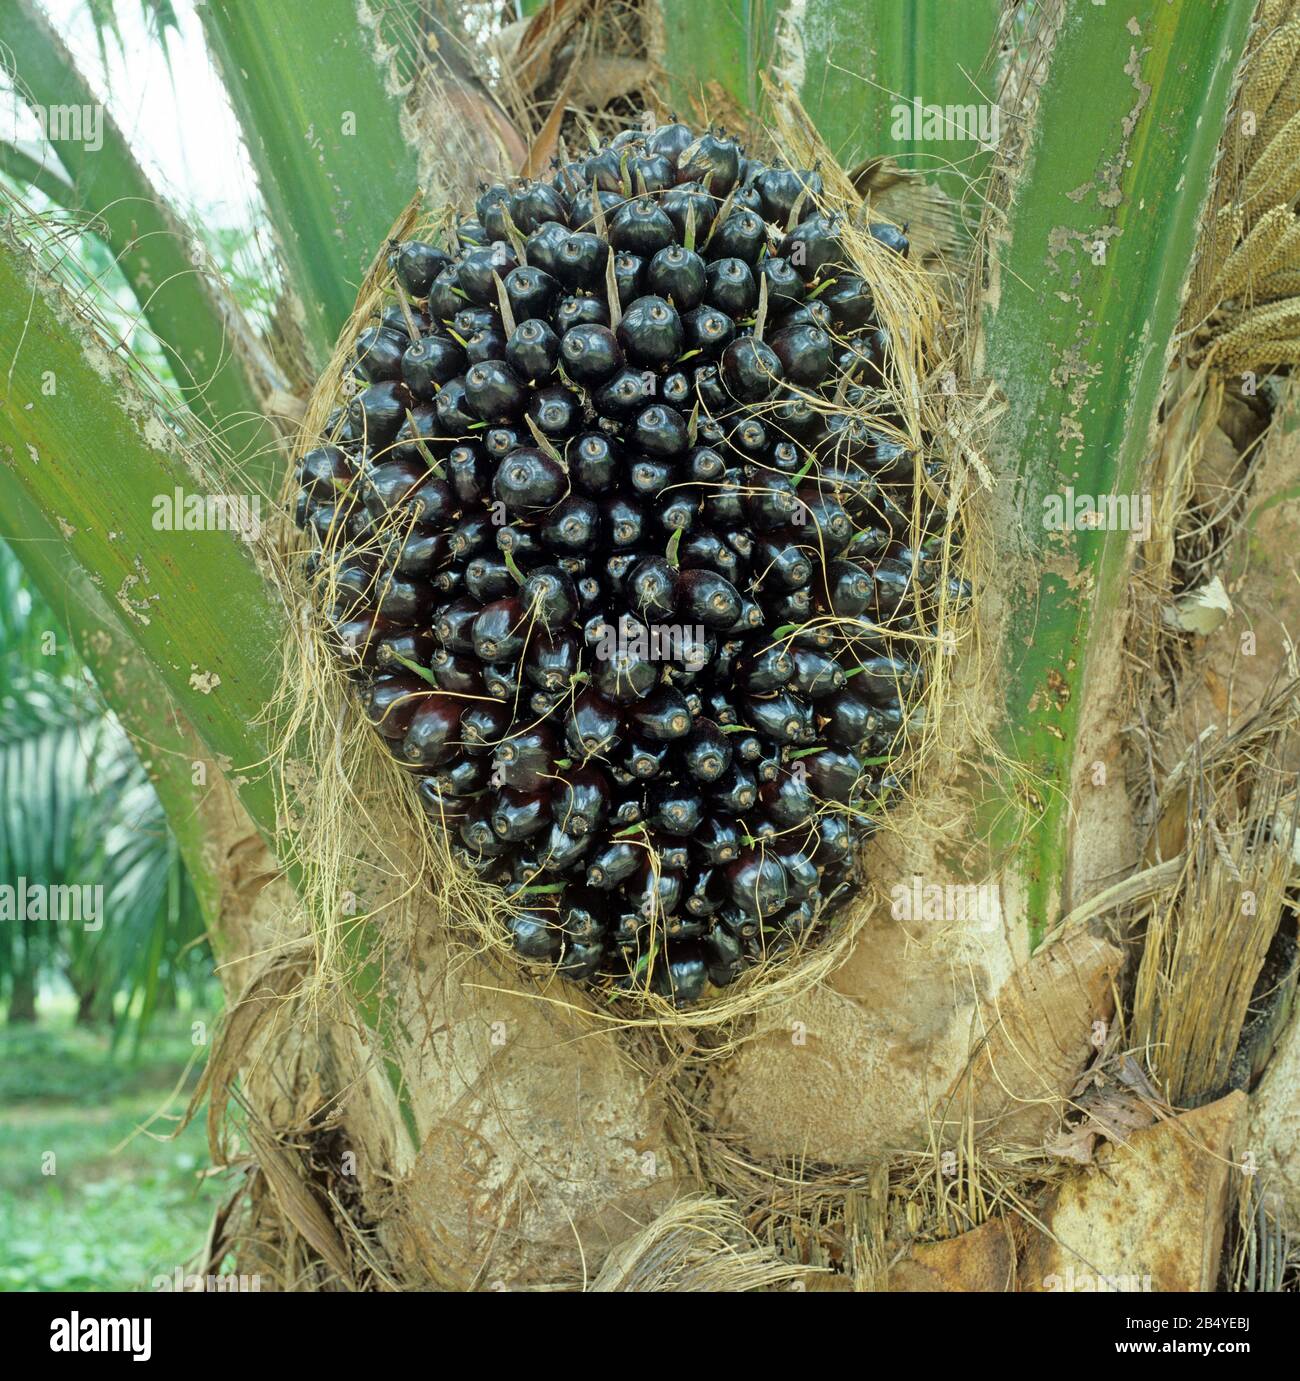 Oil palm (Elaeis guineensis) in a plantation with dark mature fruit before harvesting for oil extraction, Malaysia, February Stock Photo